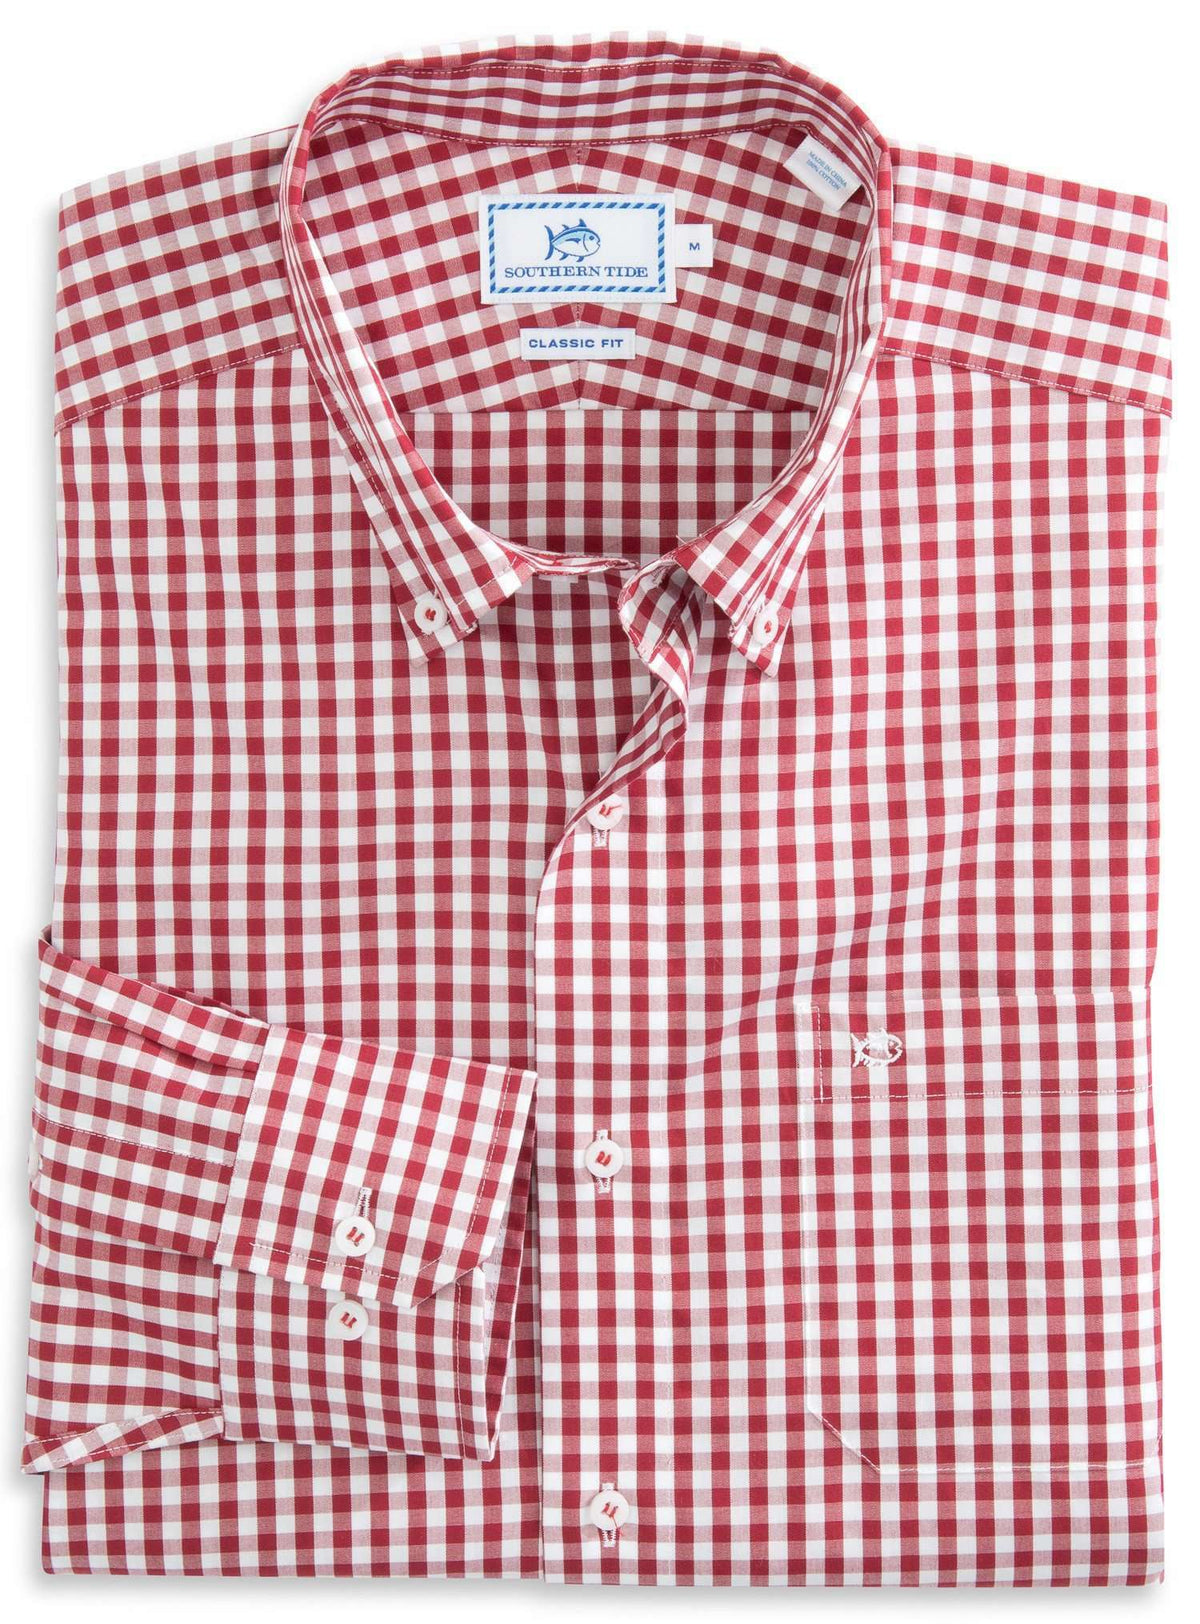 Team Colors Gingham Sport Shirt in Crimson by Southern Tide - Country Club Prep